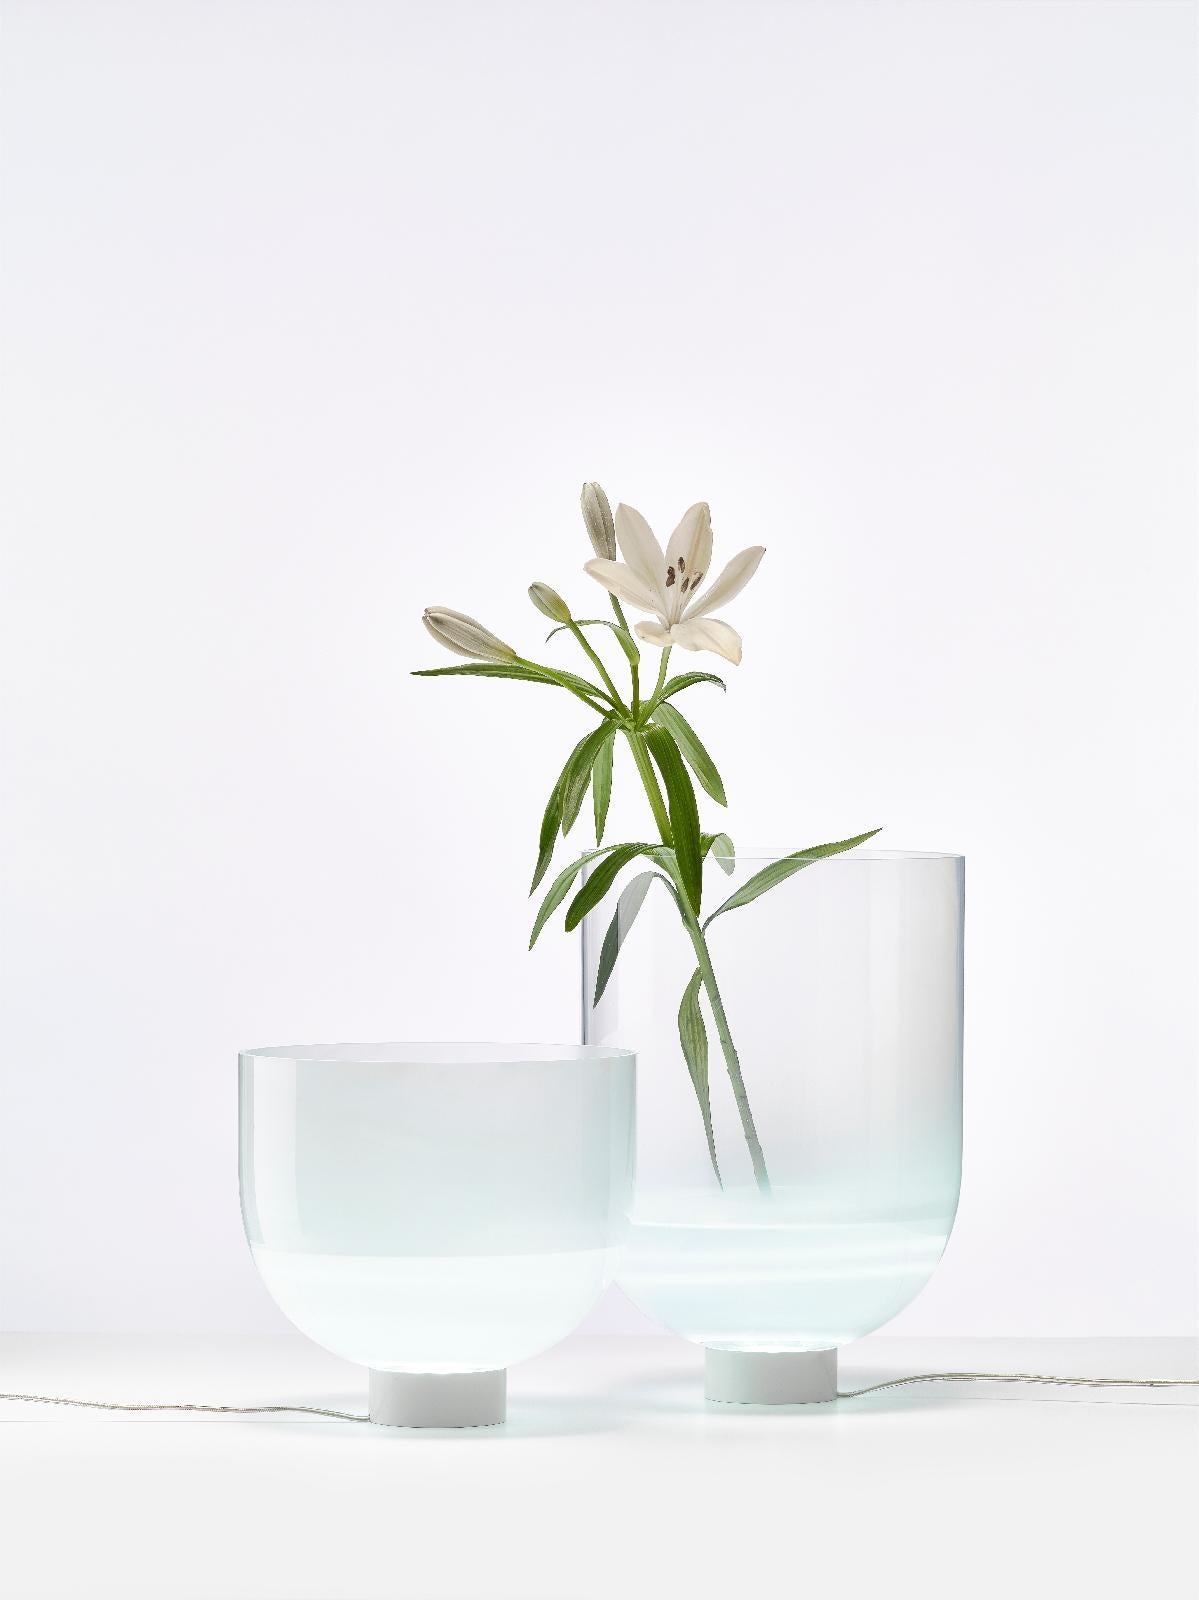 Czech Small Glowing Vase Table Lamp by Dechem Studio For Sale